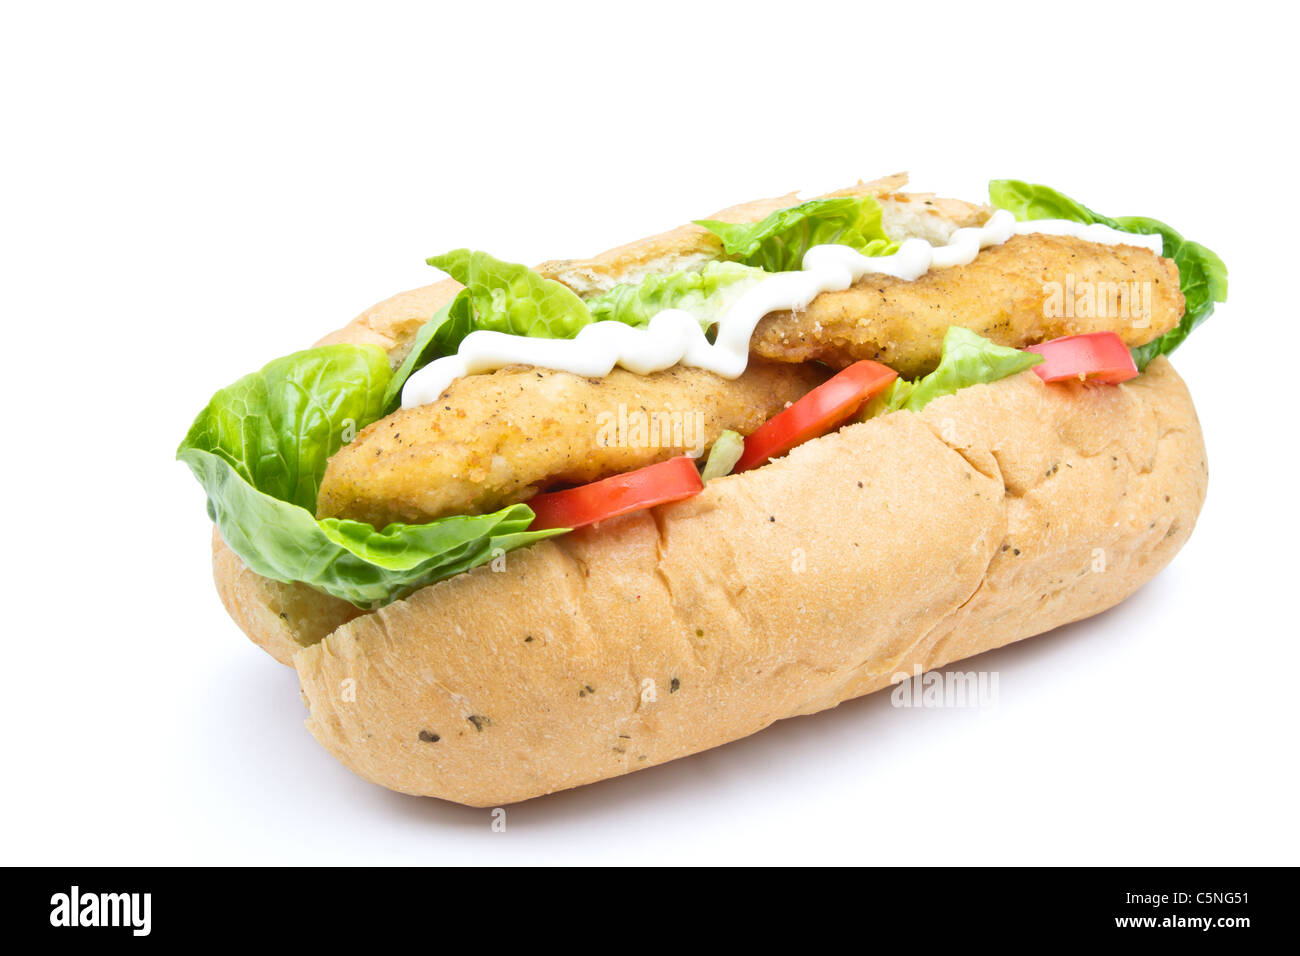 Fried Chicken Sub sandwich from low perspective isolated on white. Stock Photo